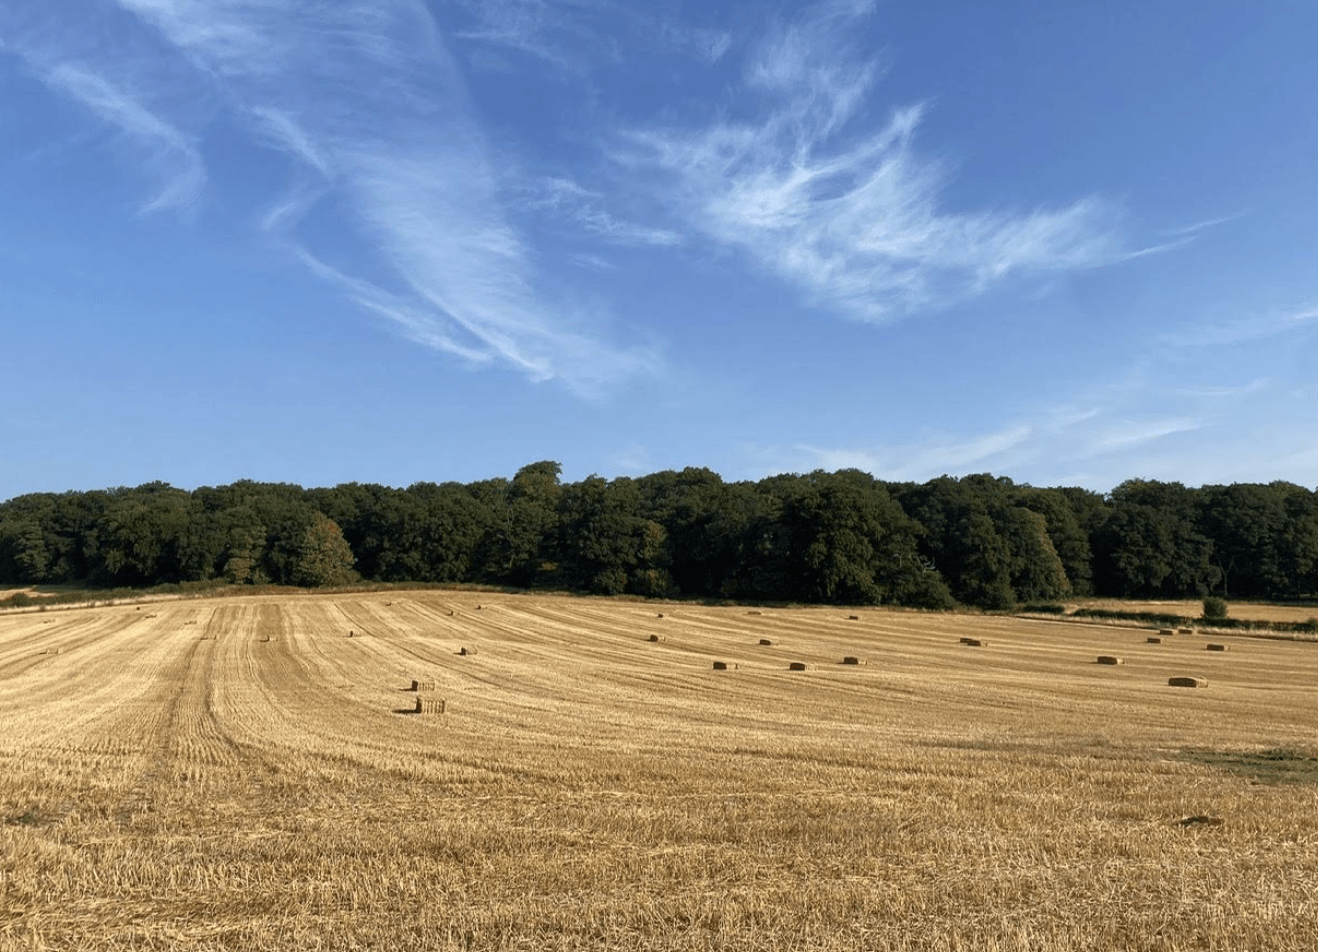 A harvested corn field is set against green trees and a clear blue sky